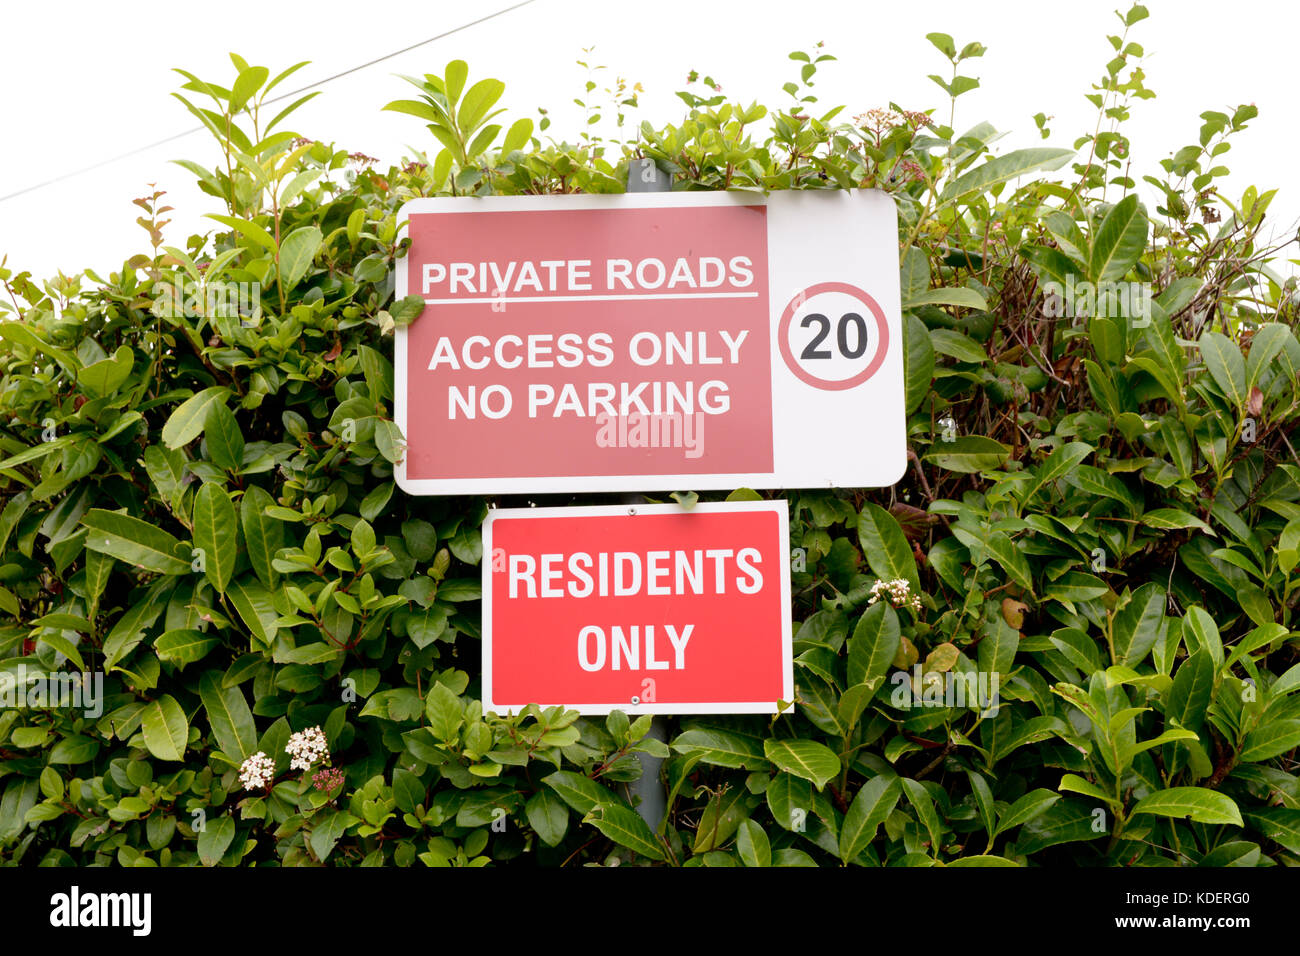 Private Roads - Access Only No Parking and Residents Only signs Stock Photo  - Alamy